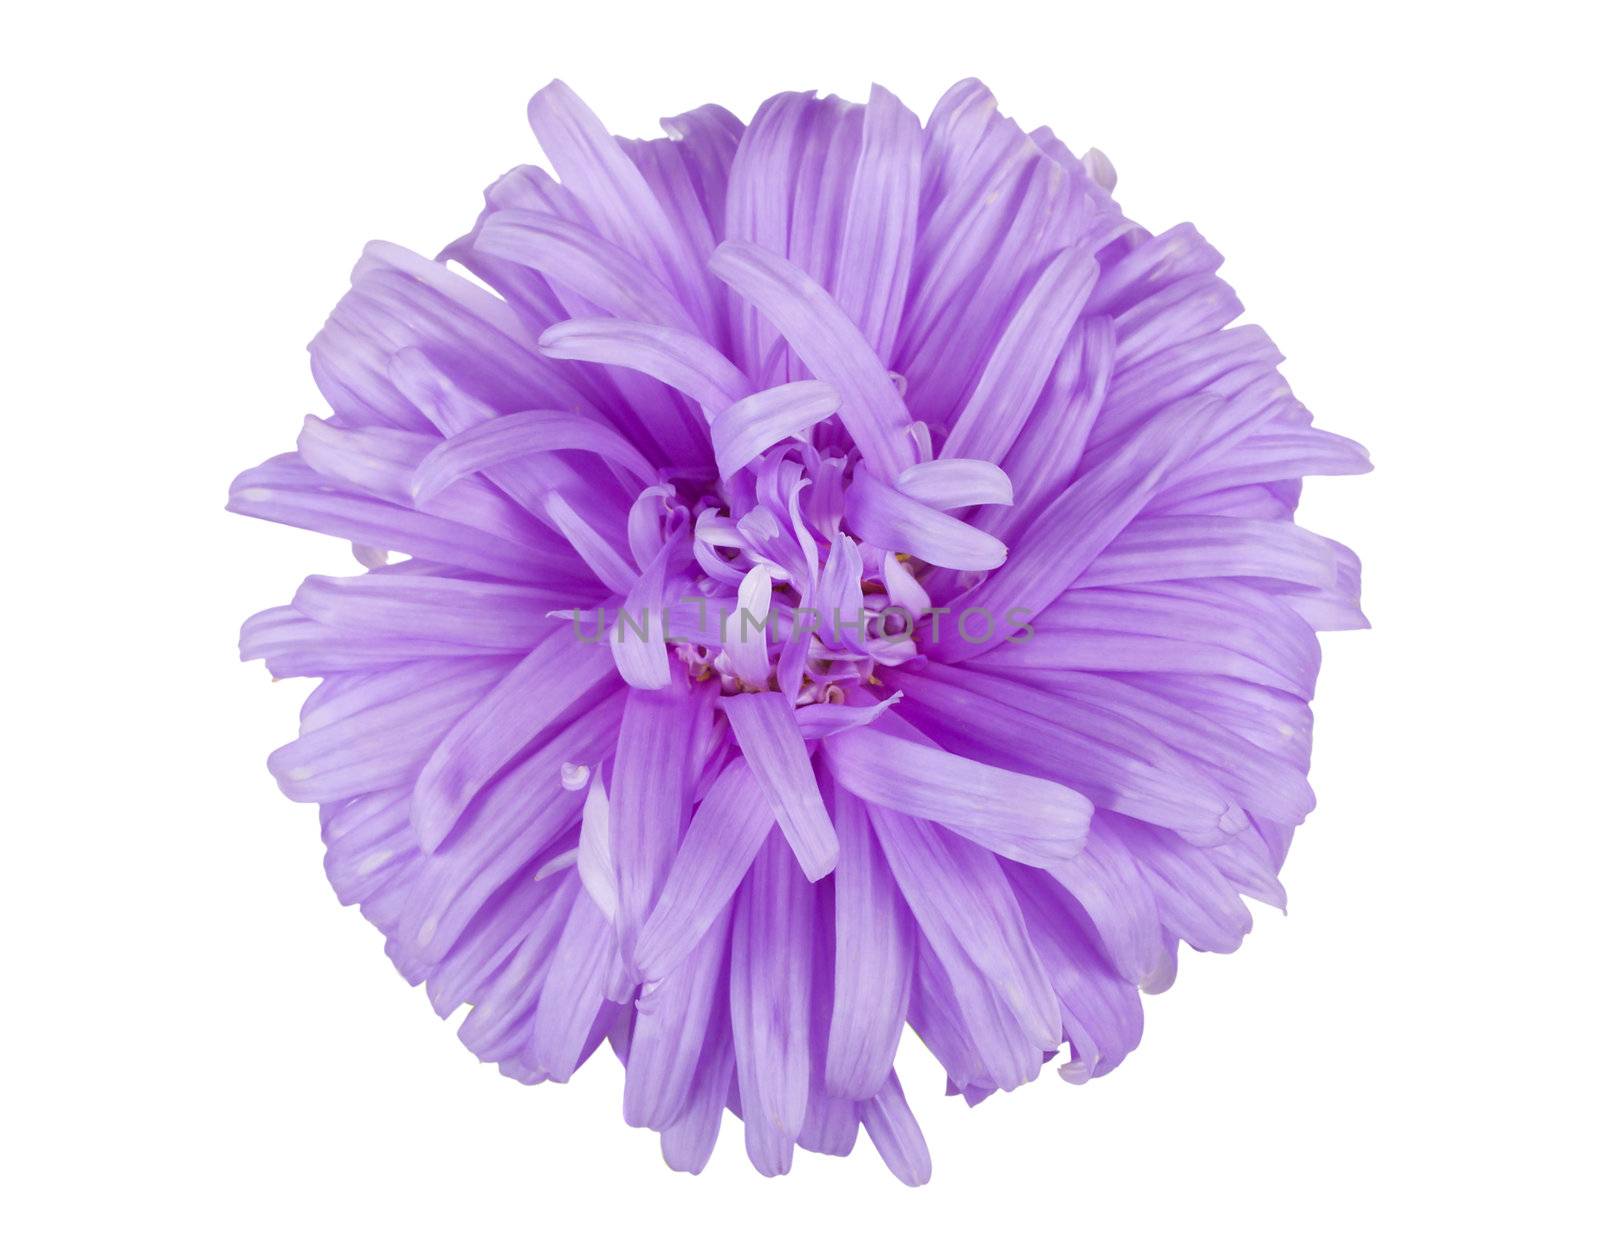 close-up violet aster flower, isolated on white